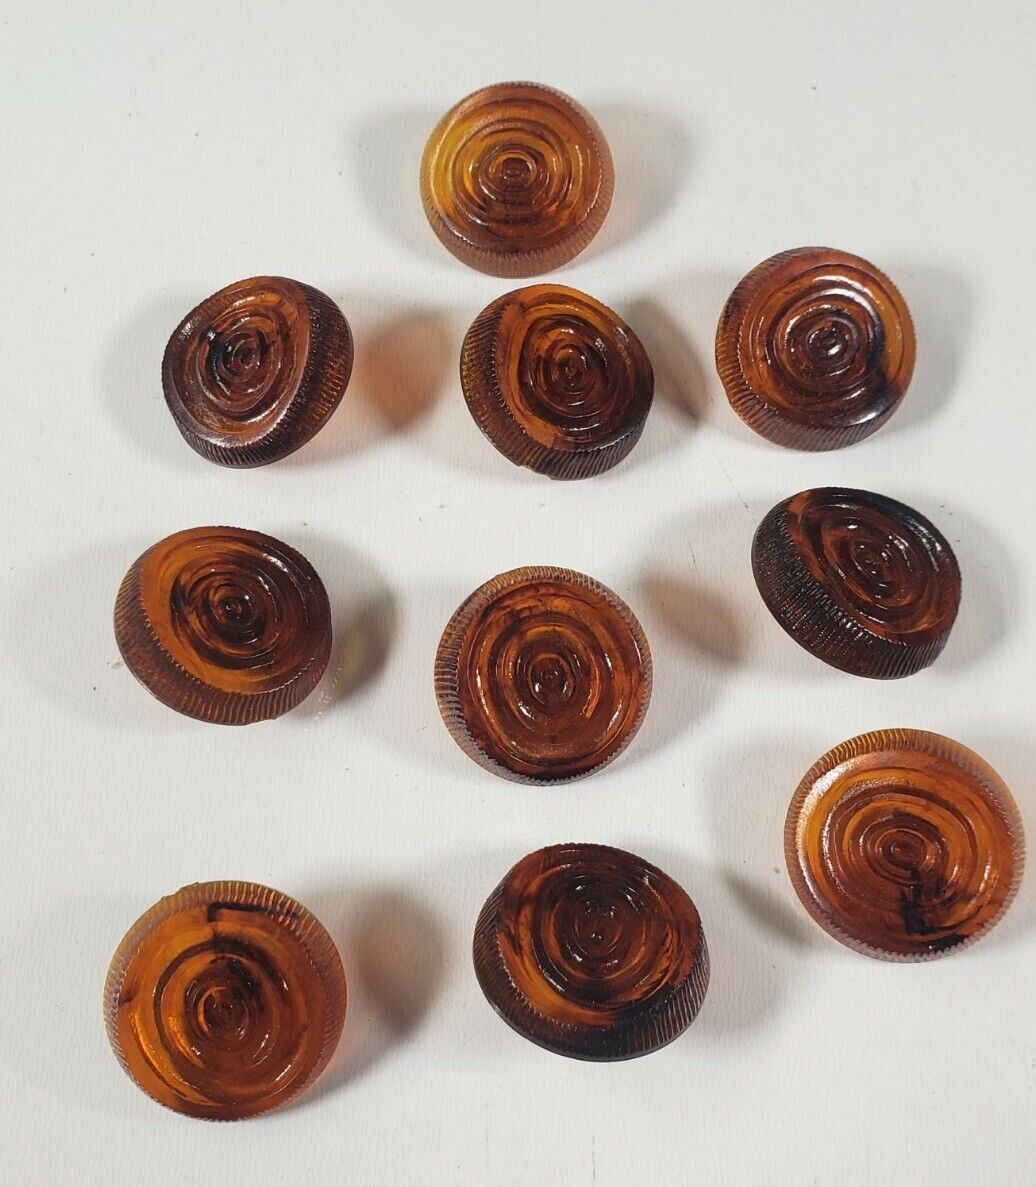 Amber Colored Plastic Buttons Shank Swirl Pattern Vintage Sewing Craft Supply